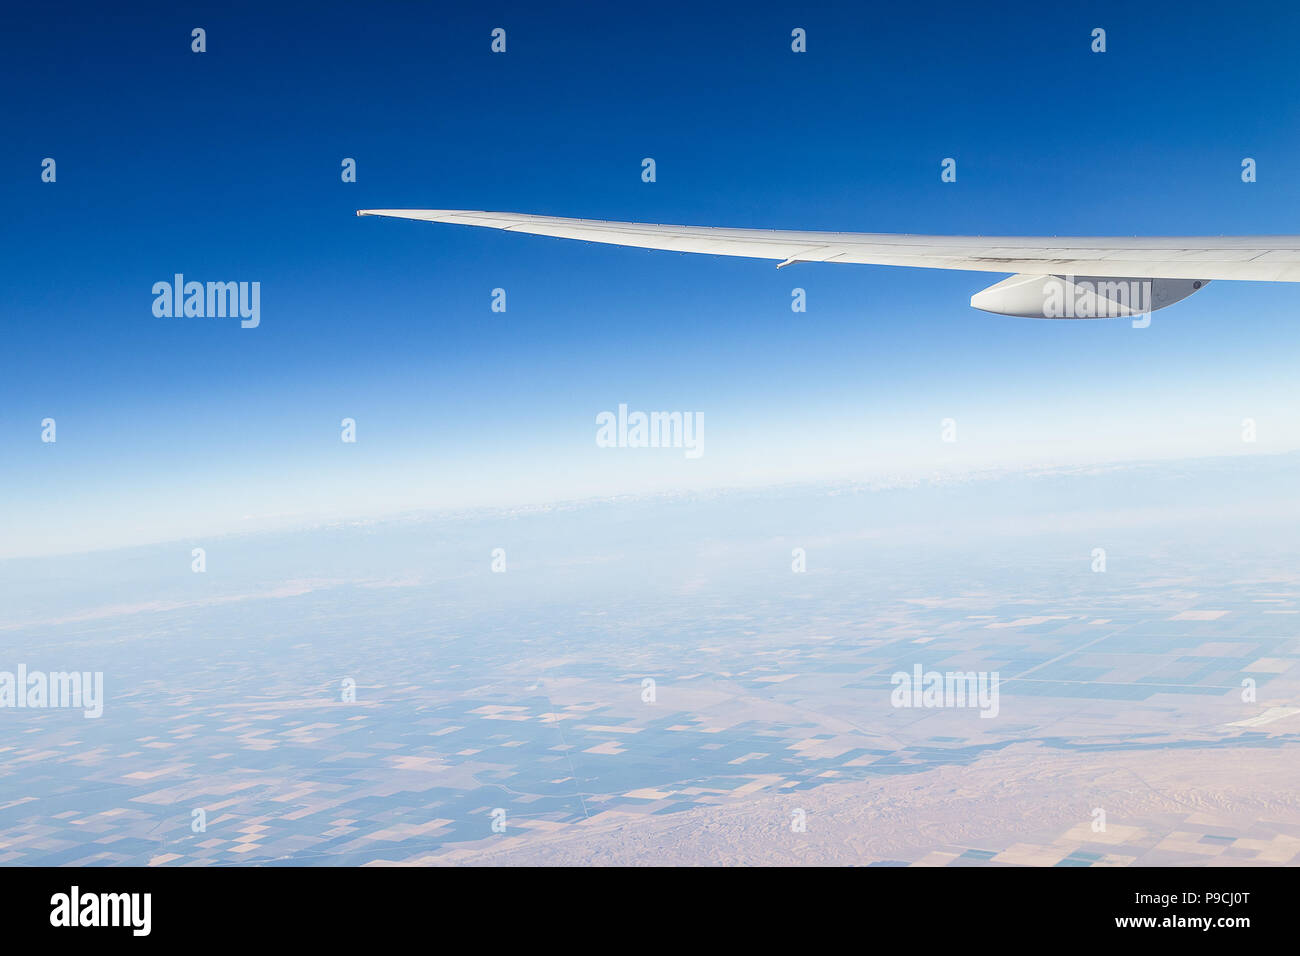 Air plane wing with blue sky and valley below. Stock Photo